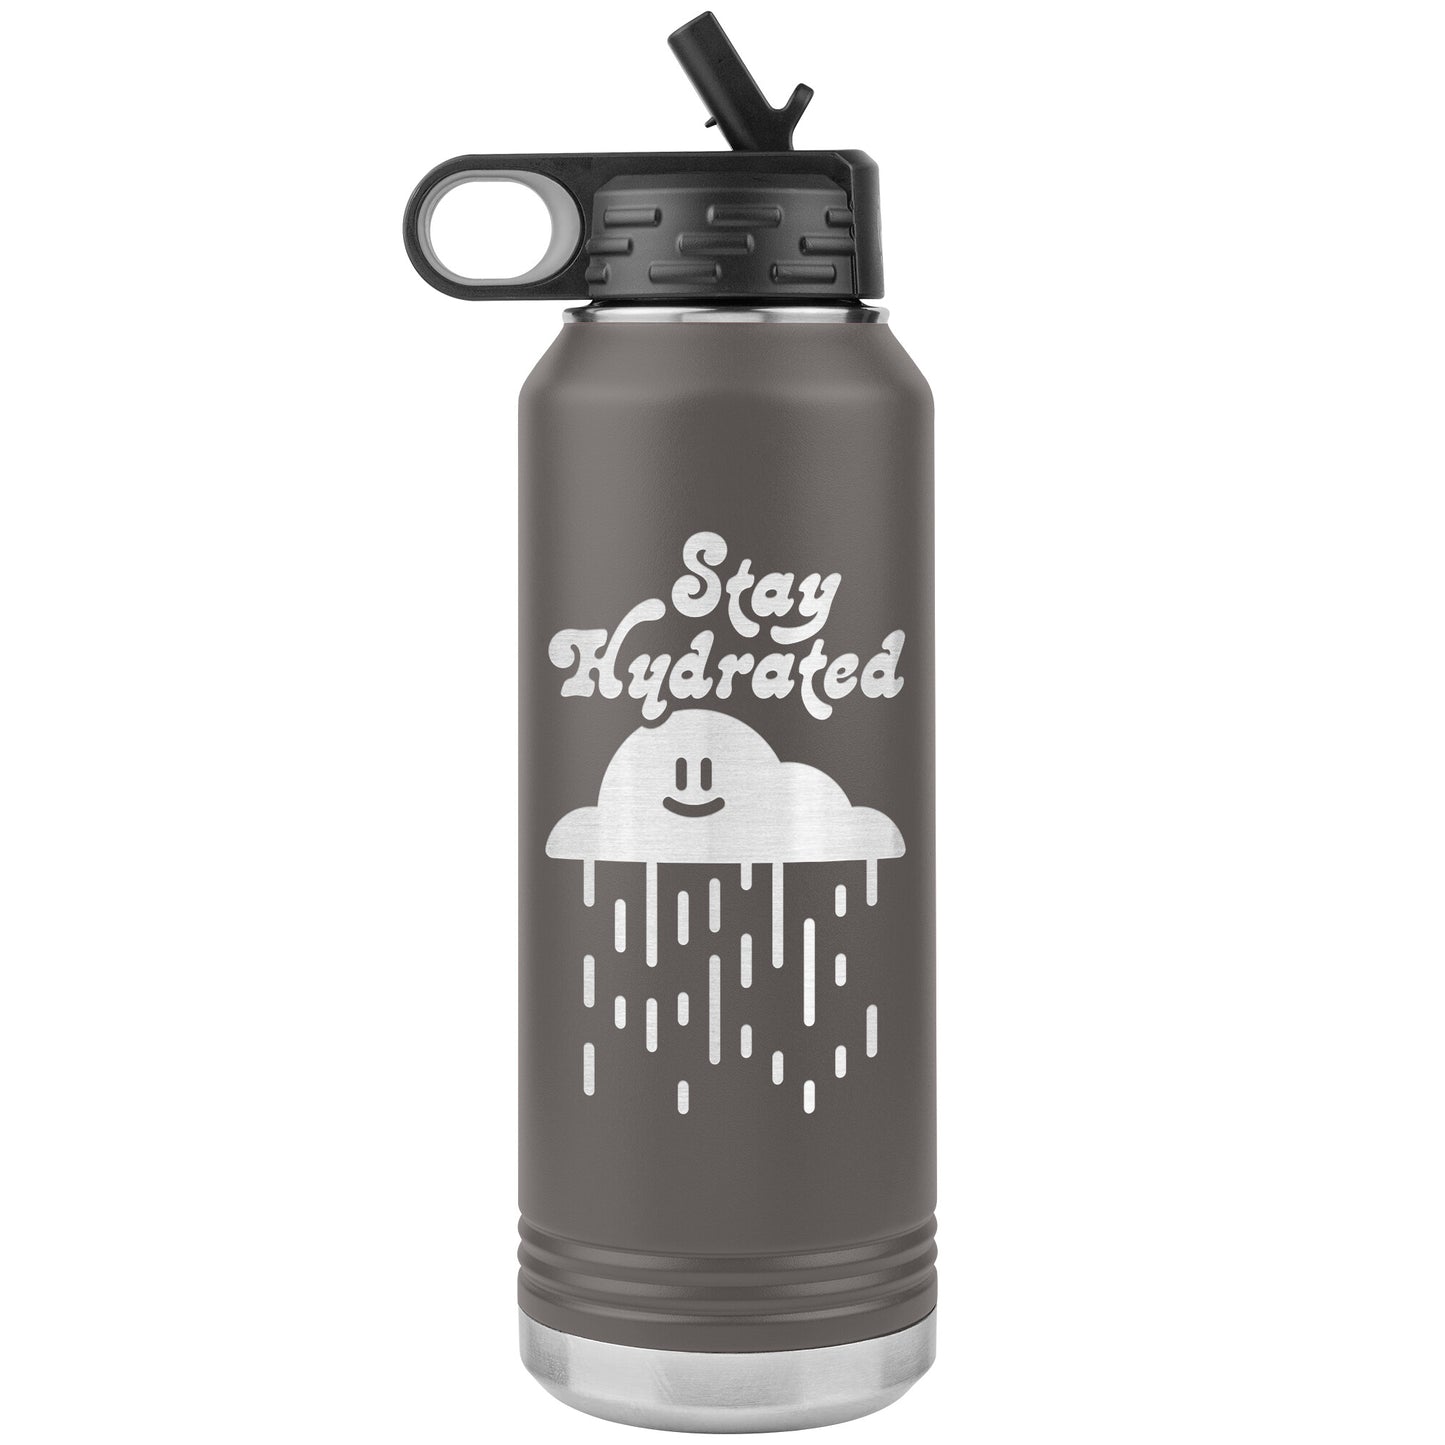 Stay Hydrated 03 - 32oz Insulated Water Bottle